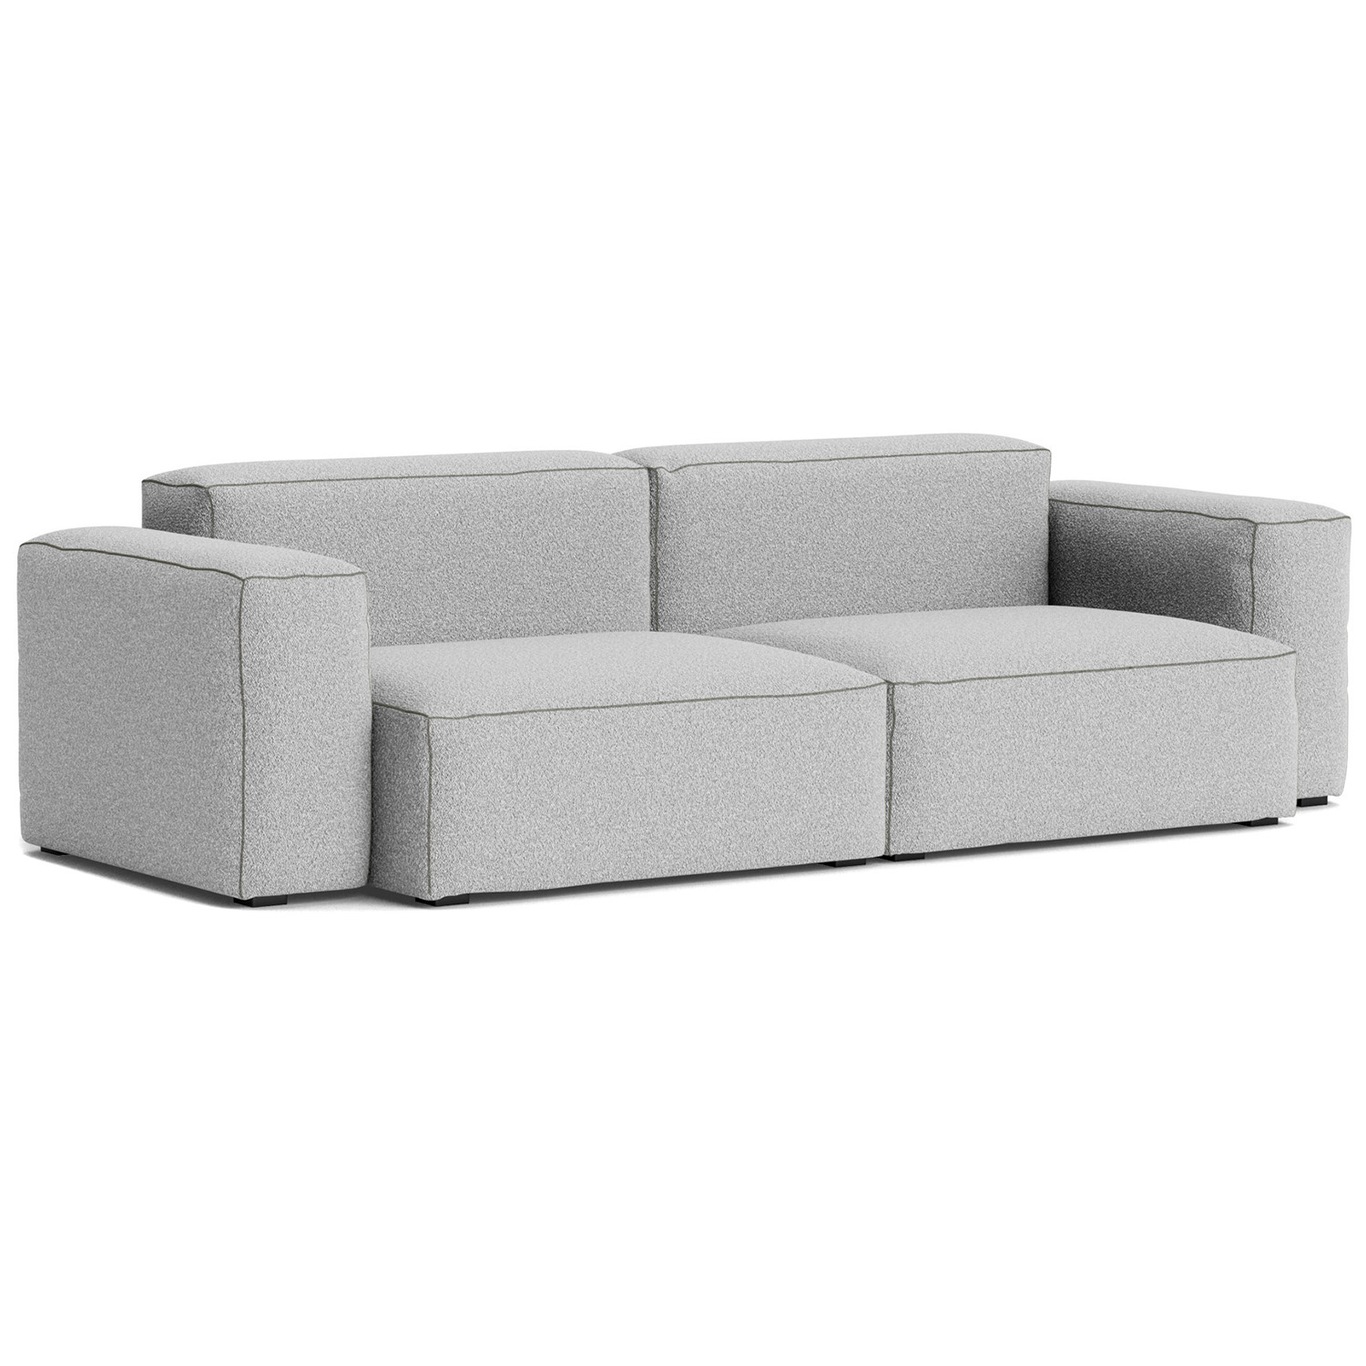 Mags Soft Low 2,5-personers Sofa Comb. 1, Flamiber Grey C8 / Mørkegrå Syning